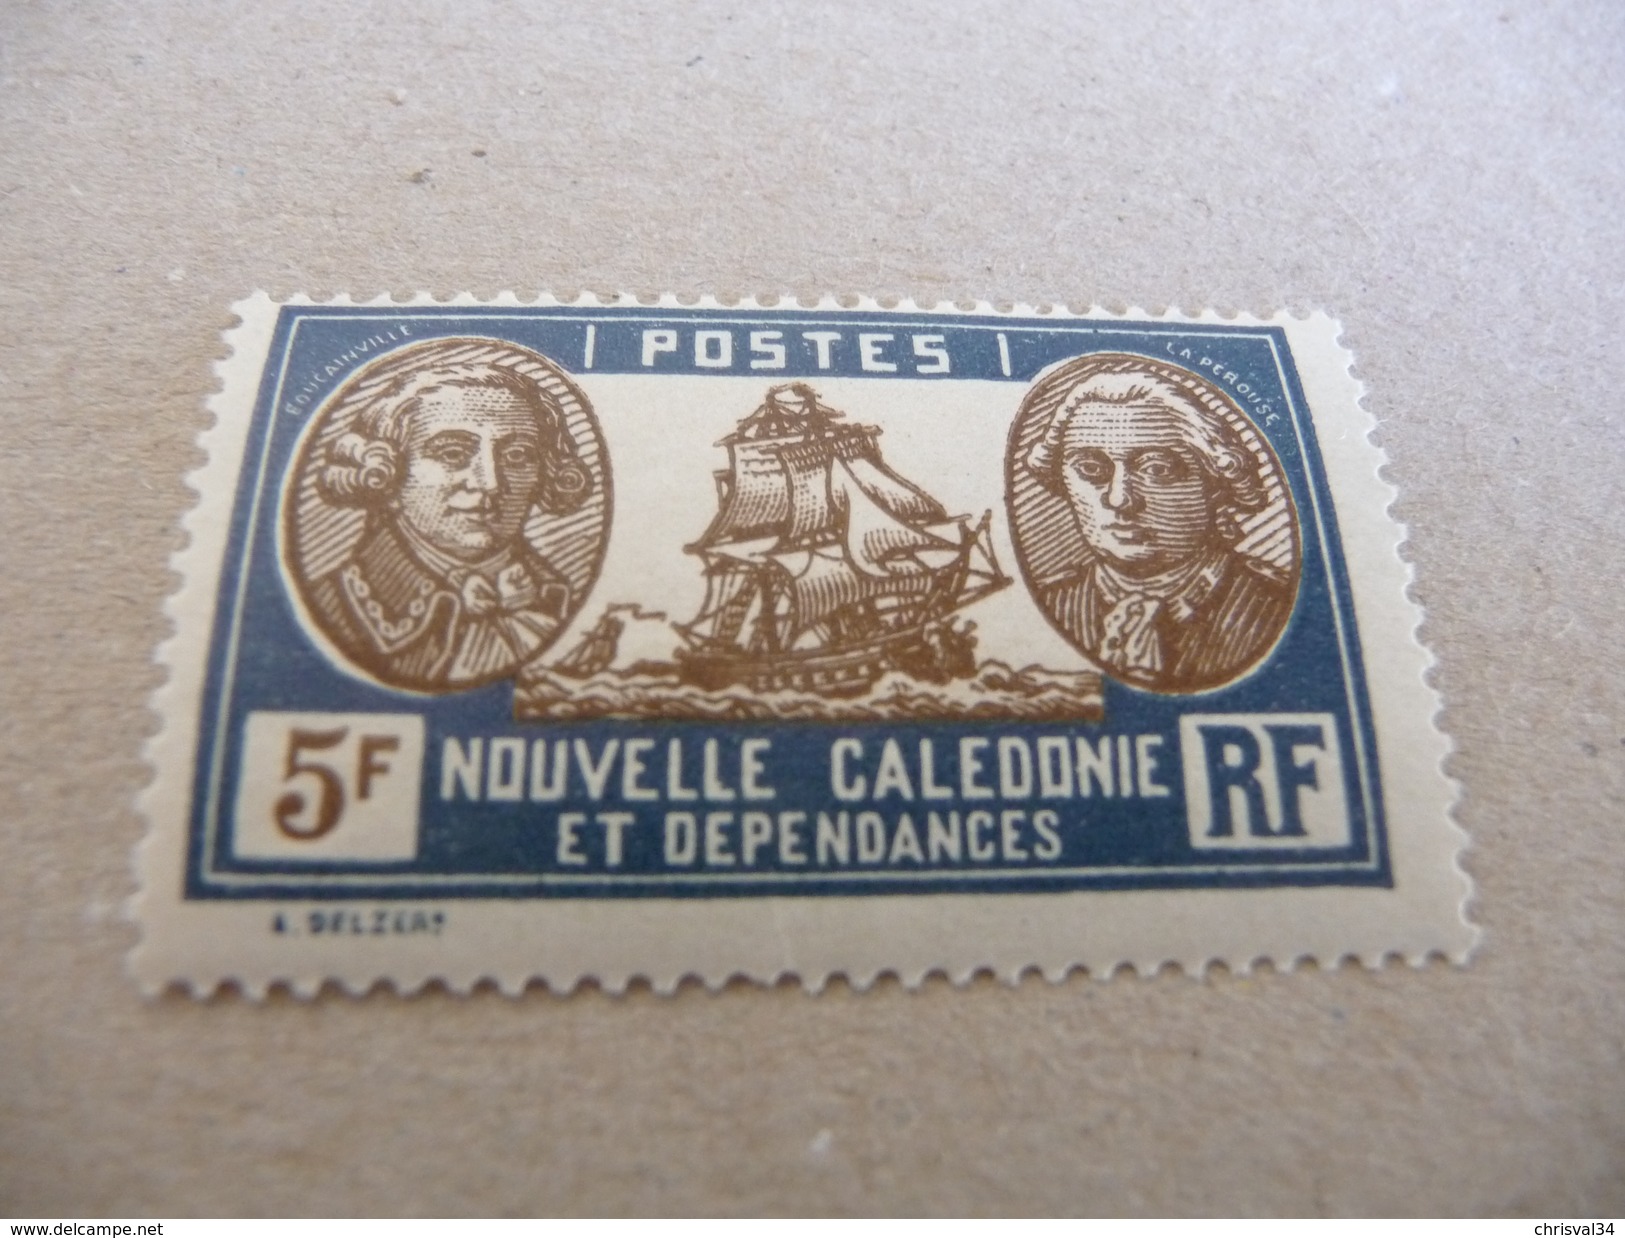 TIMBRE  NOUVELLE-CALEDONIE     N  159   COTE  1,30  EUROS    NEUF  TRACE  CHARNIERE - Neufs